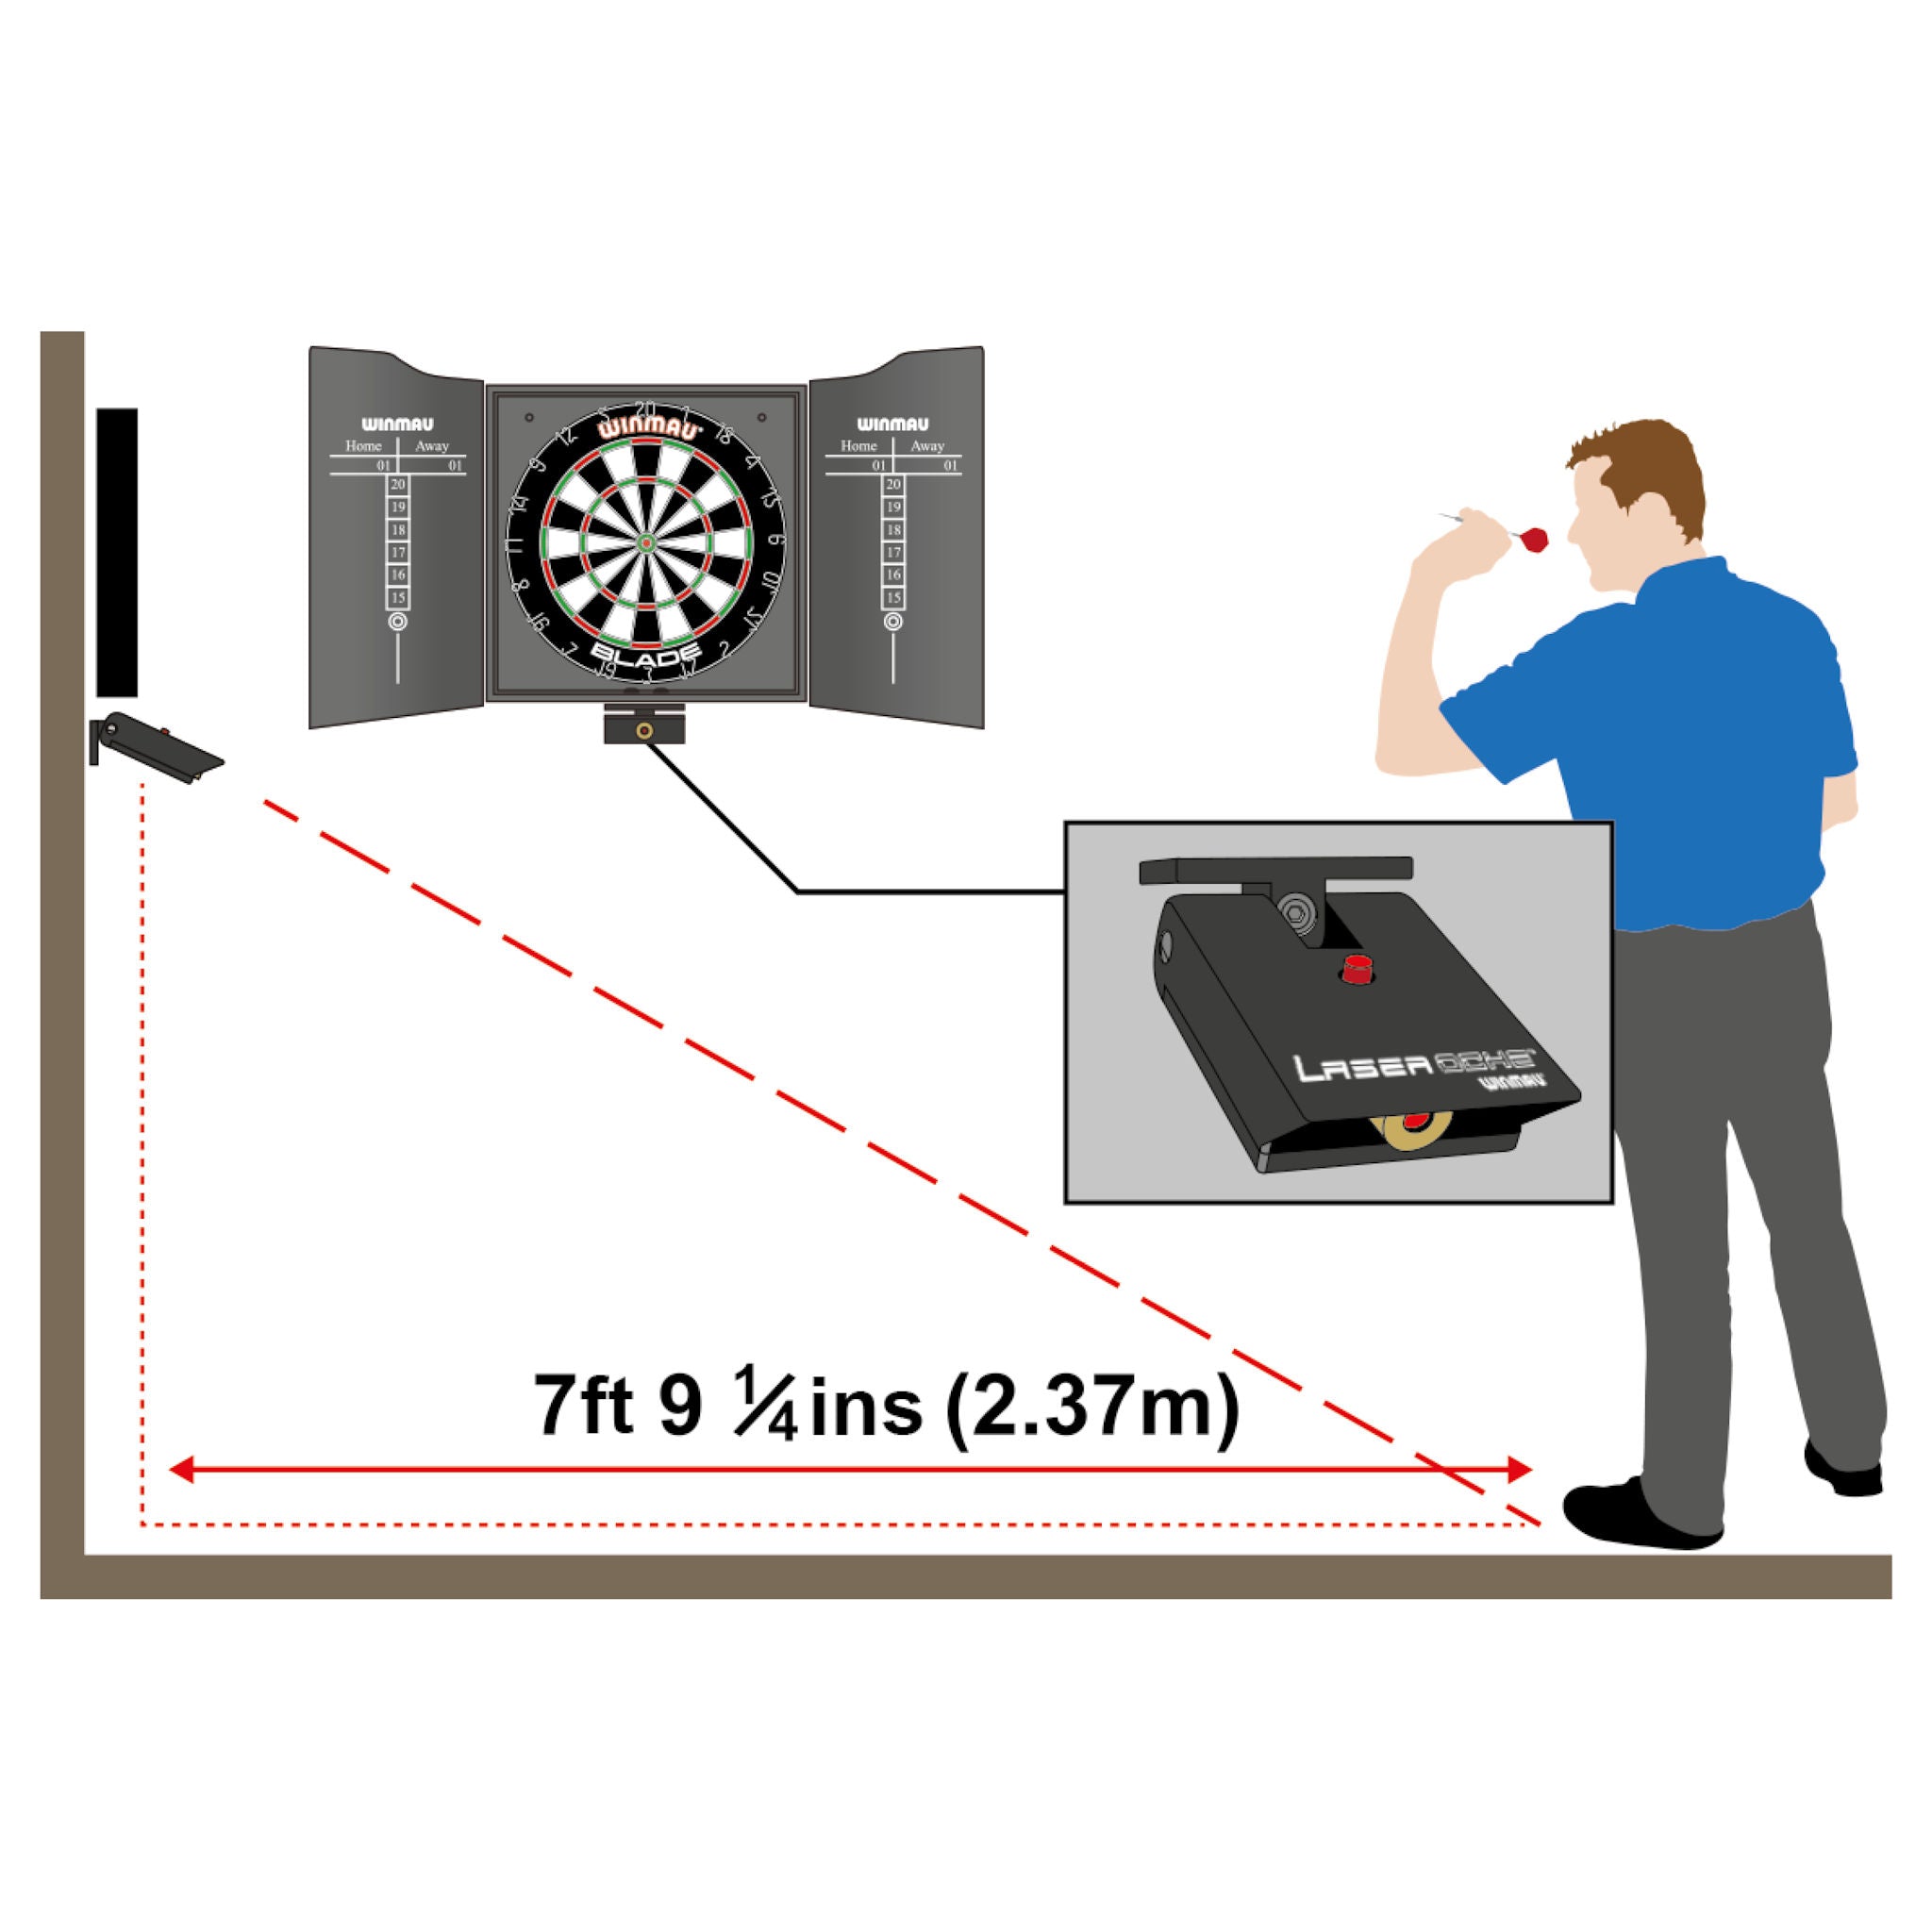 Laser Oche model showing how to use it